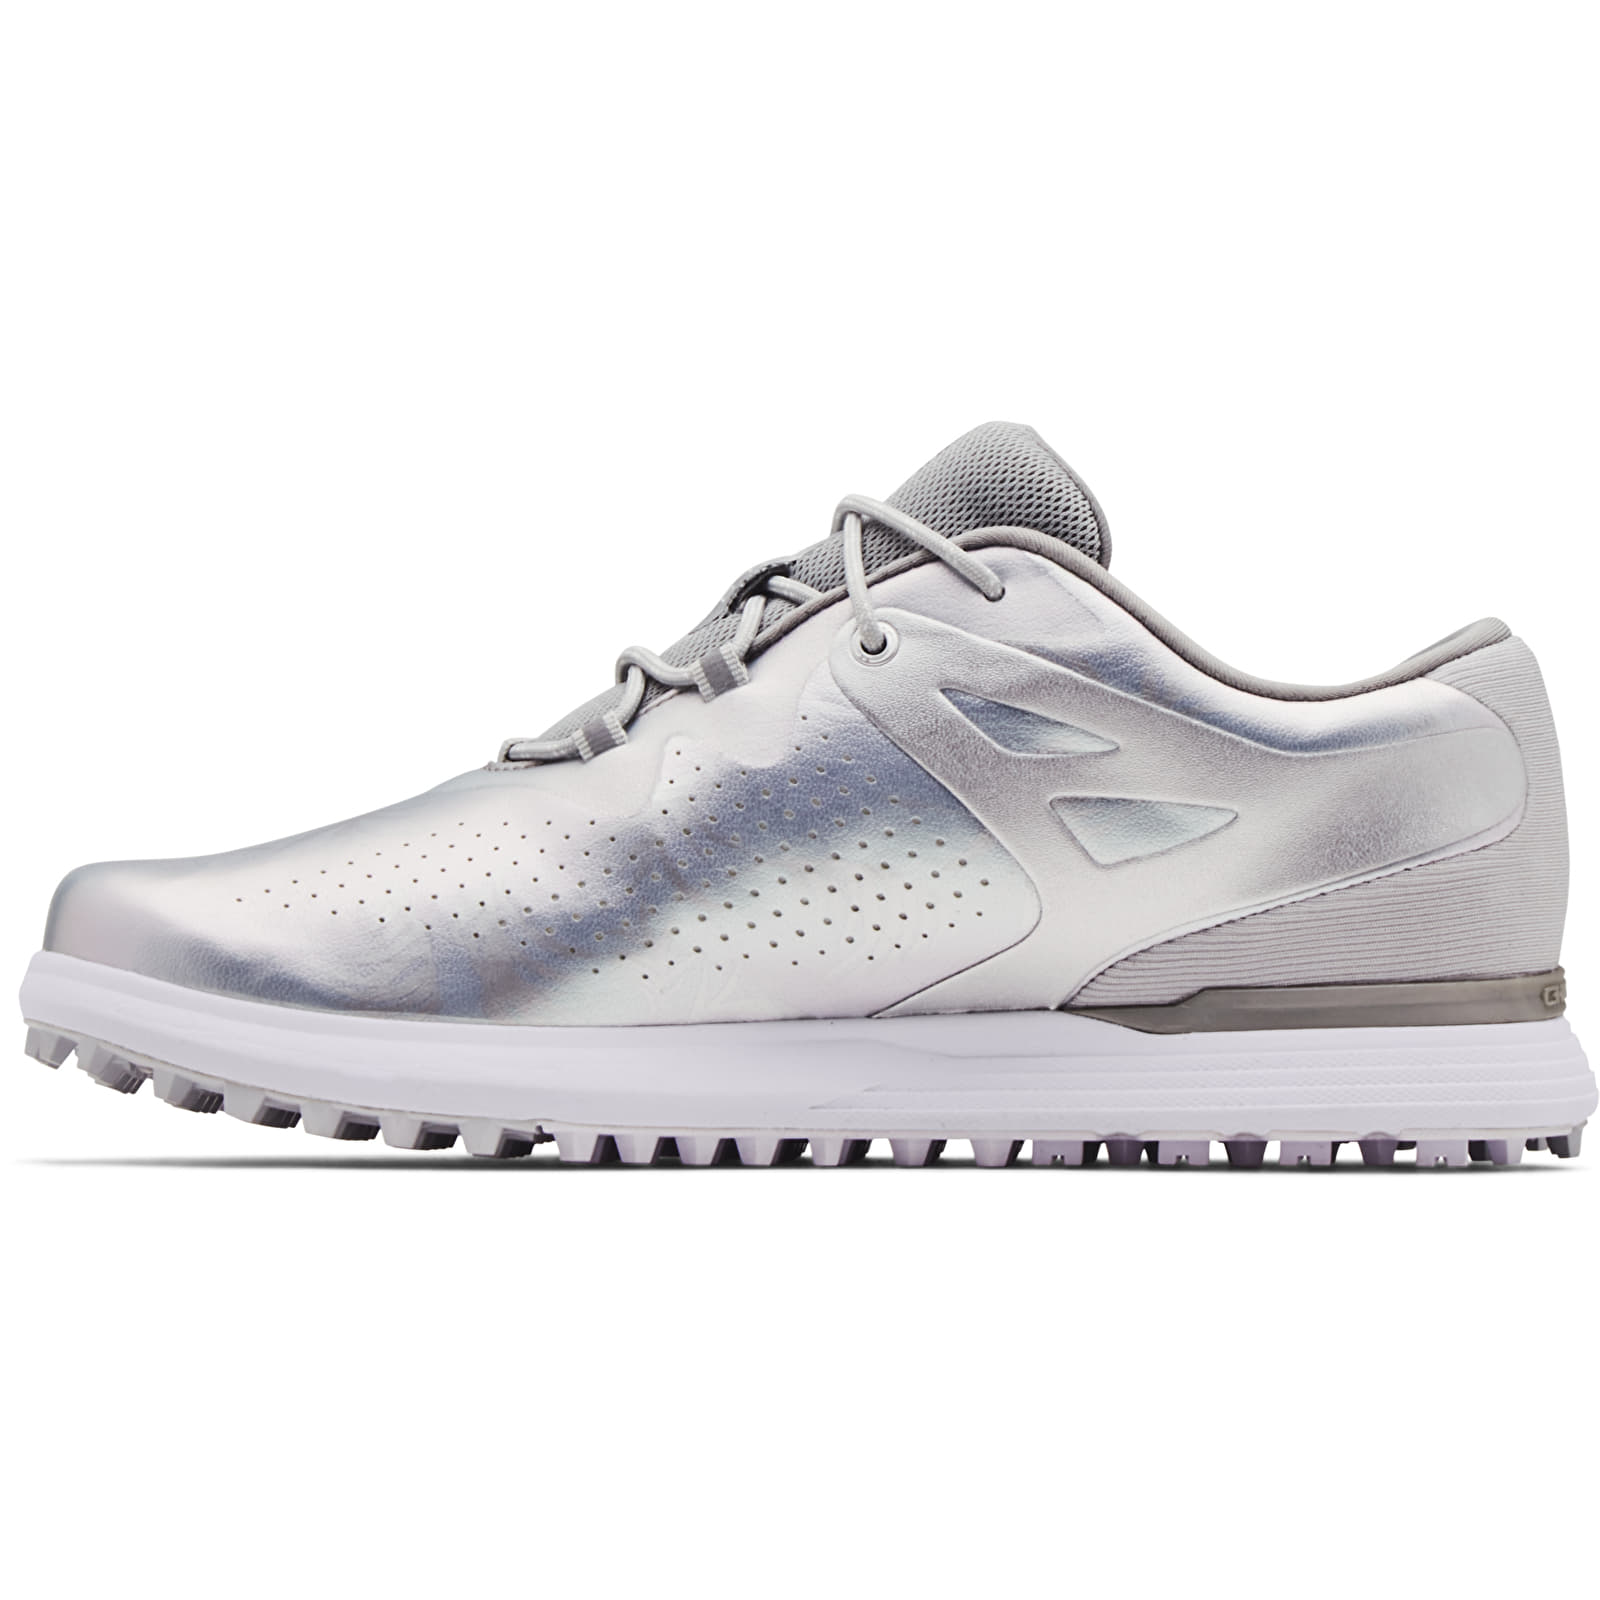 Chaussures et baskets femme Under Armour W Charged Breathe SL White